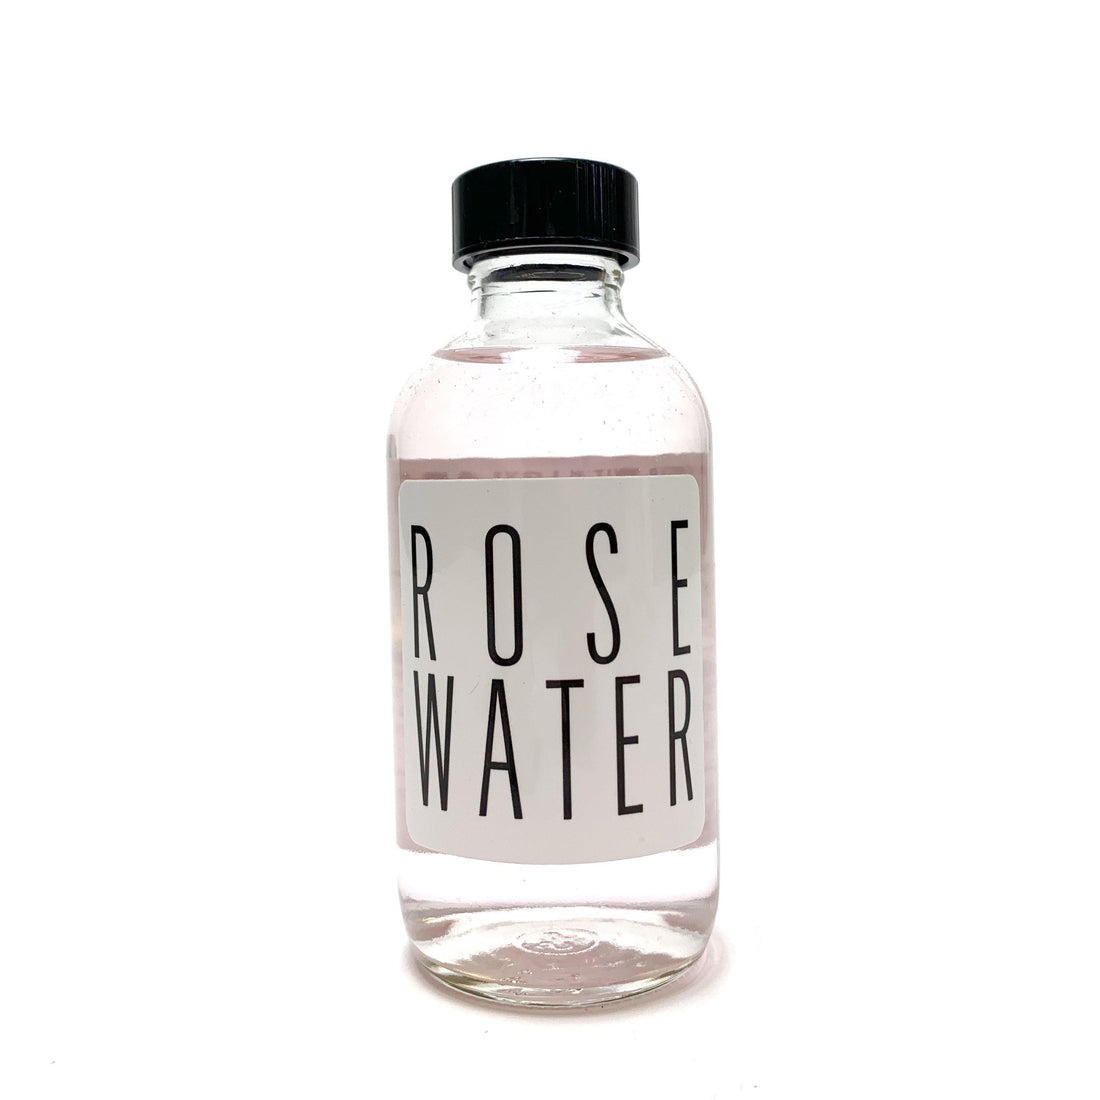 Rose Water Holy Waters and Colognes House of Intuition 4 oz $12.00 